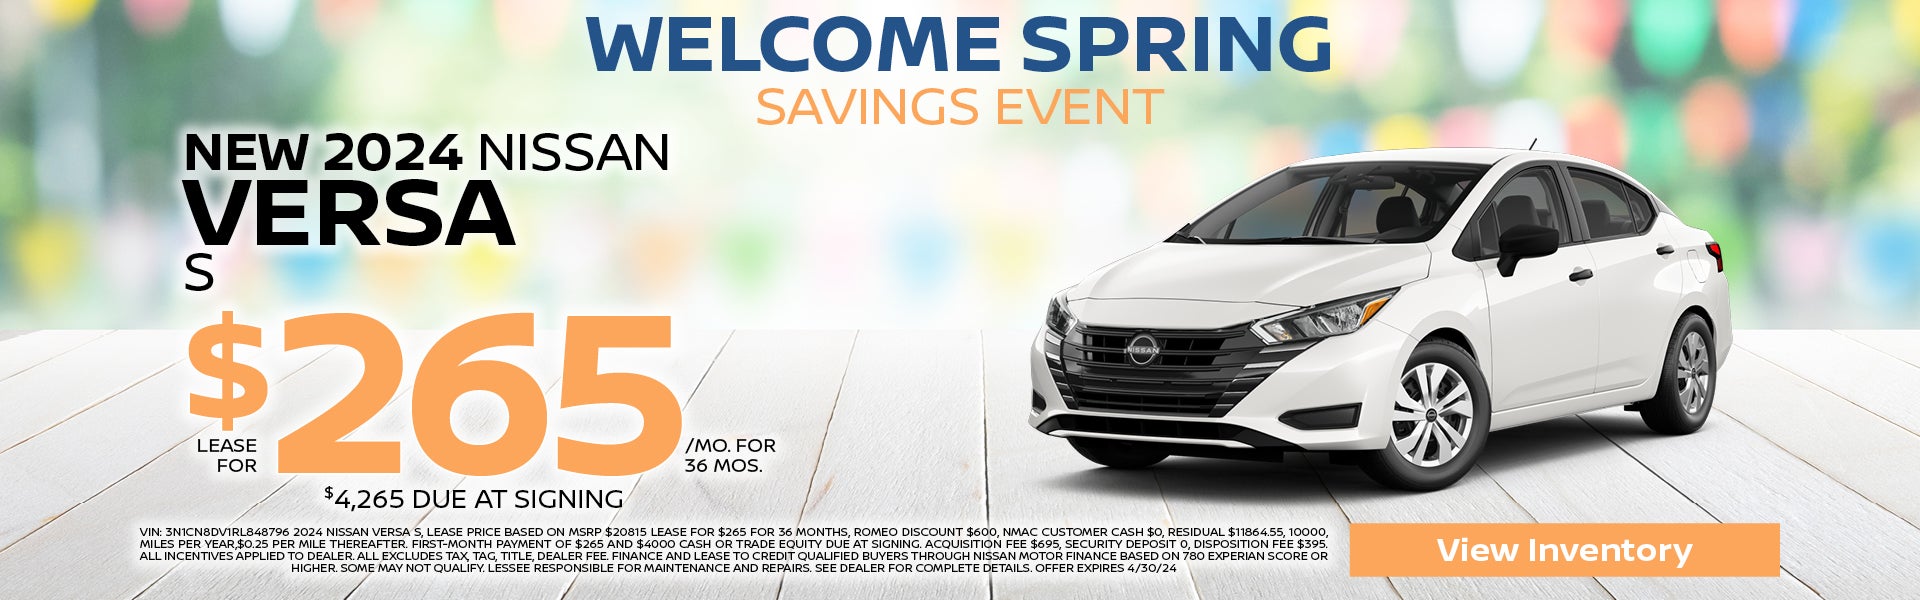 Welcome Spring Sales Event